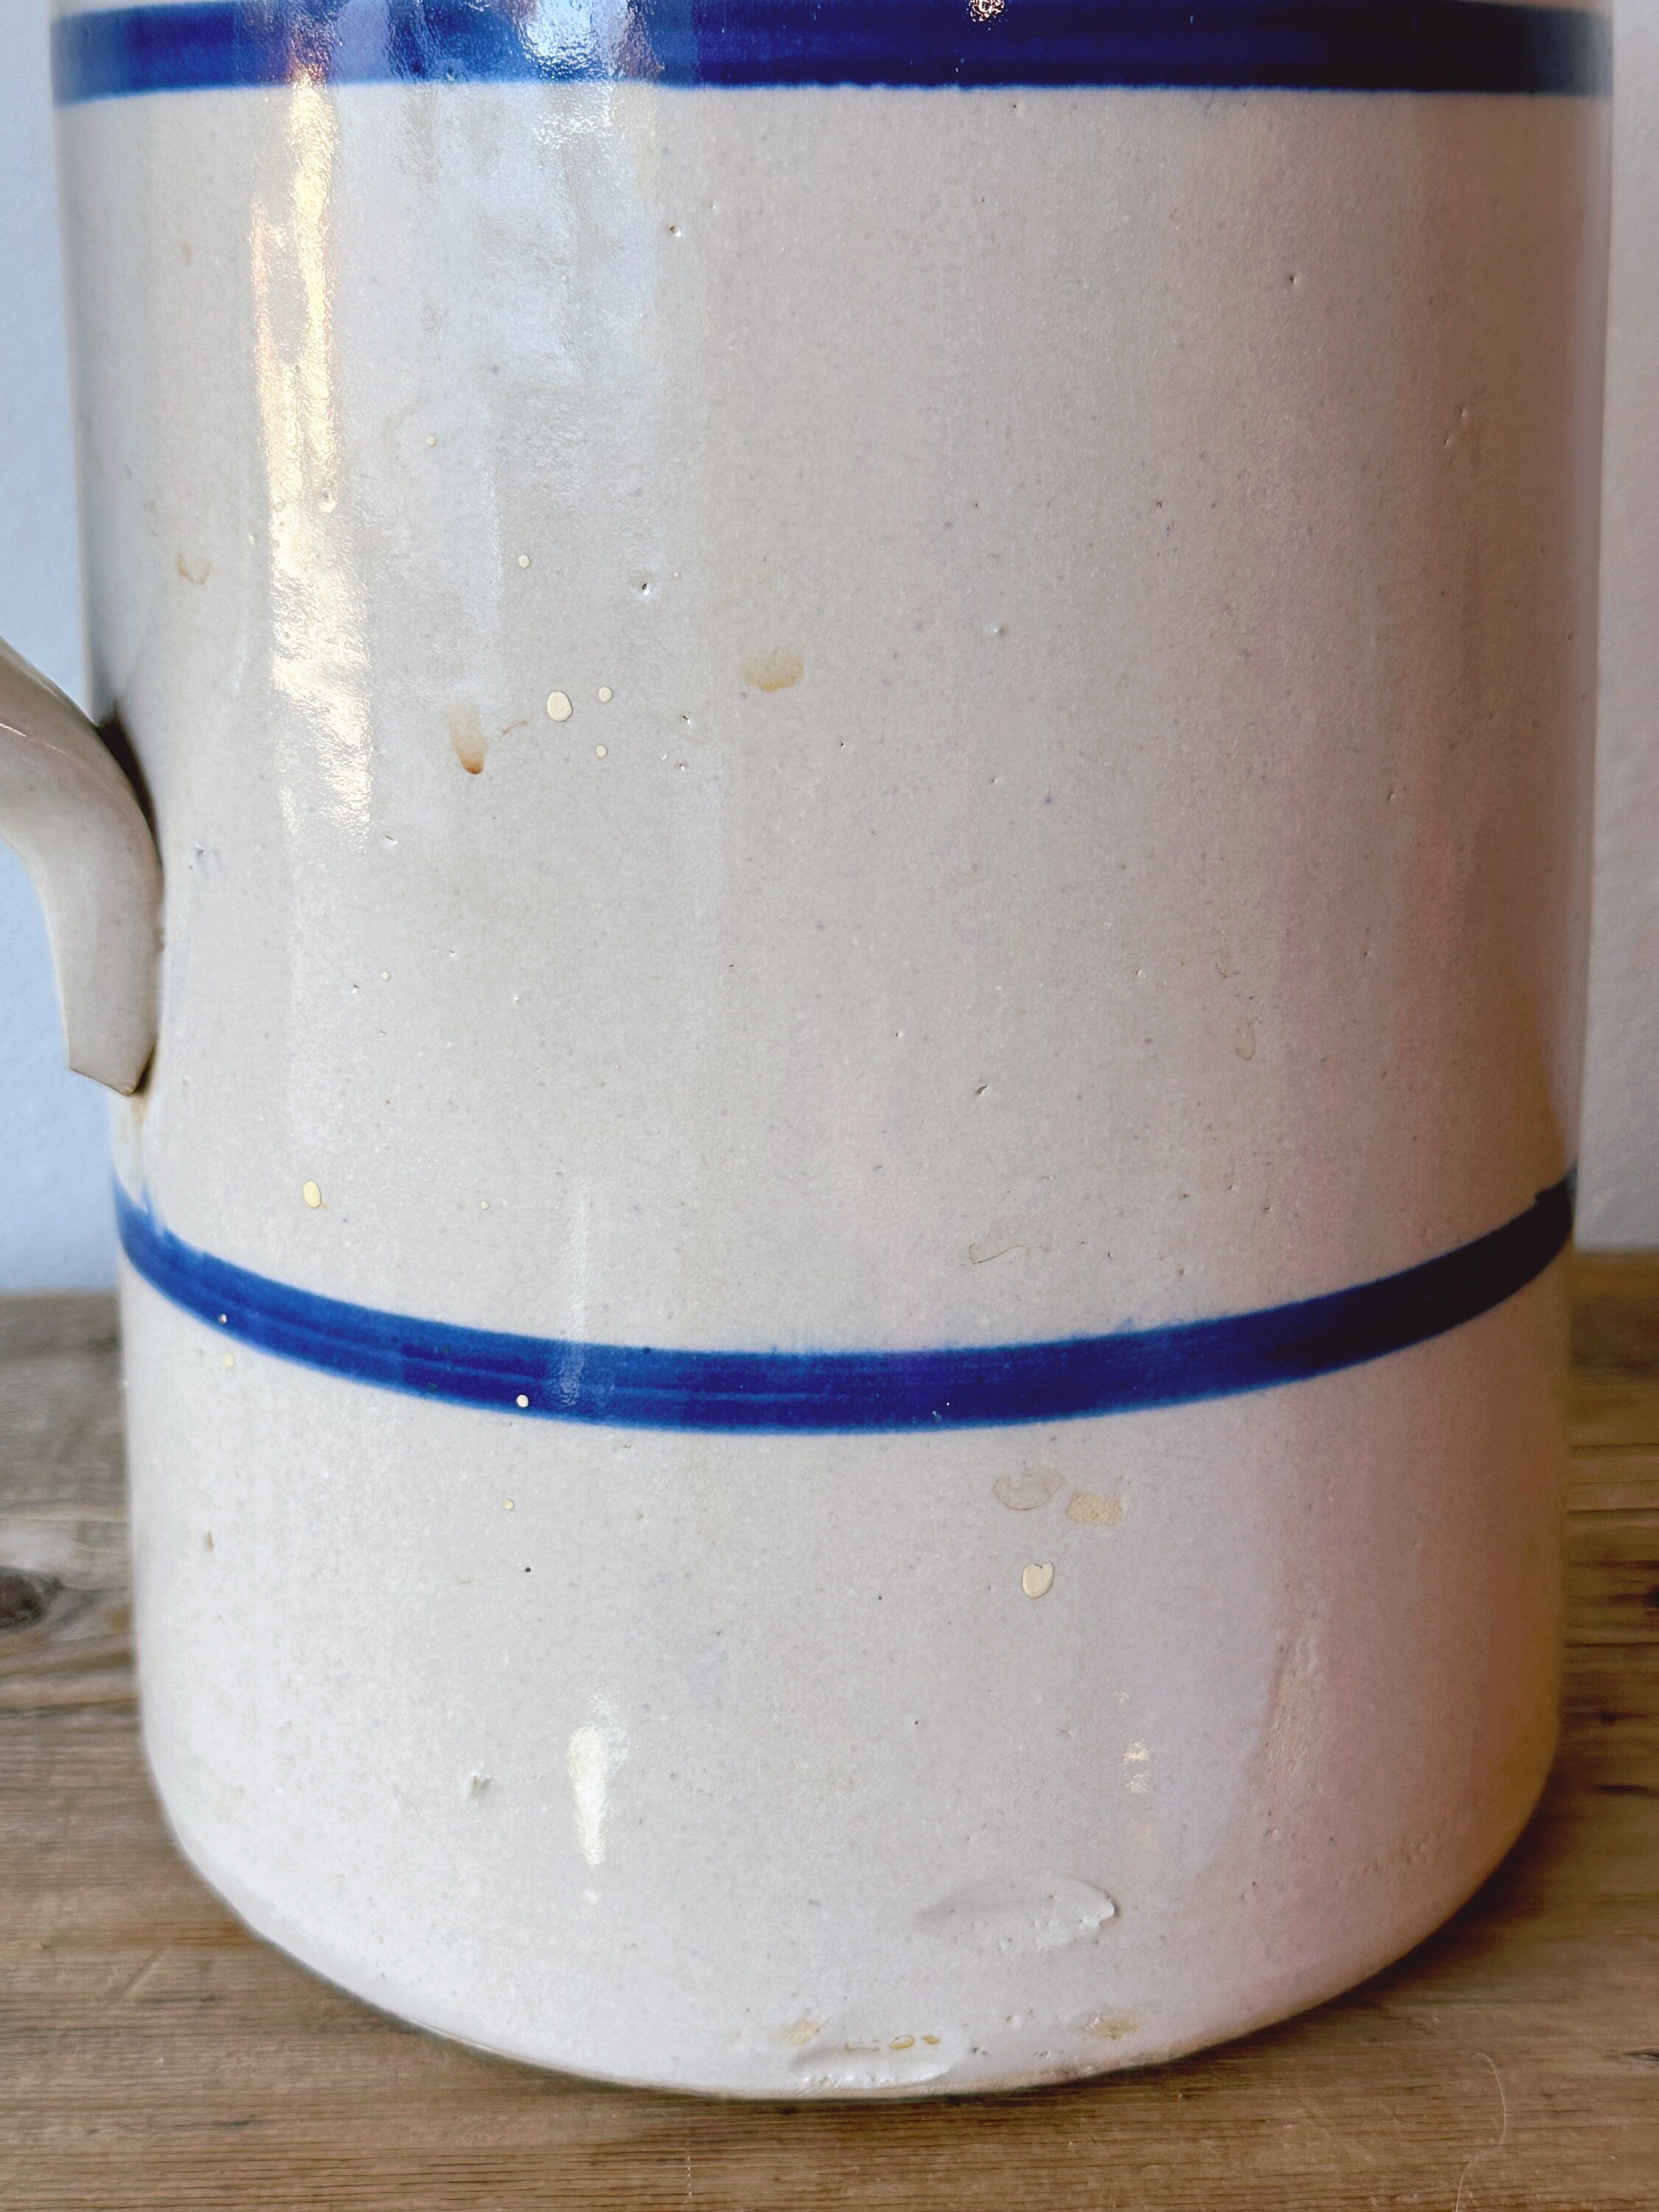 Large Vintage Stoneware Pitcher with Blue Stripes | Salt Glazed French Country Style Utensil Holder | Rustic Farmhouse Kitchen Decor